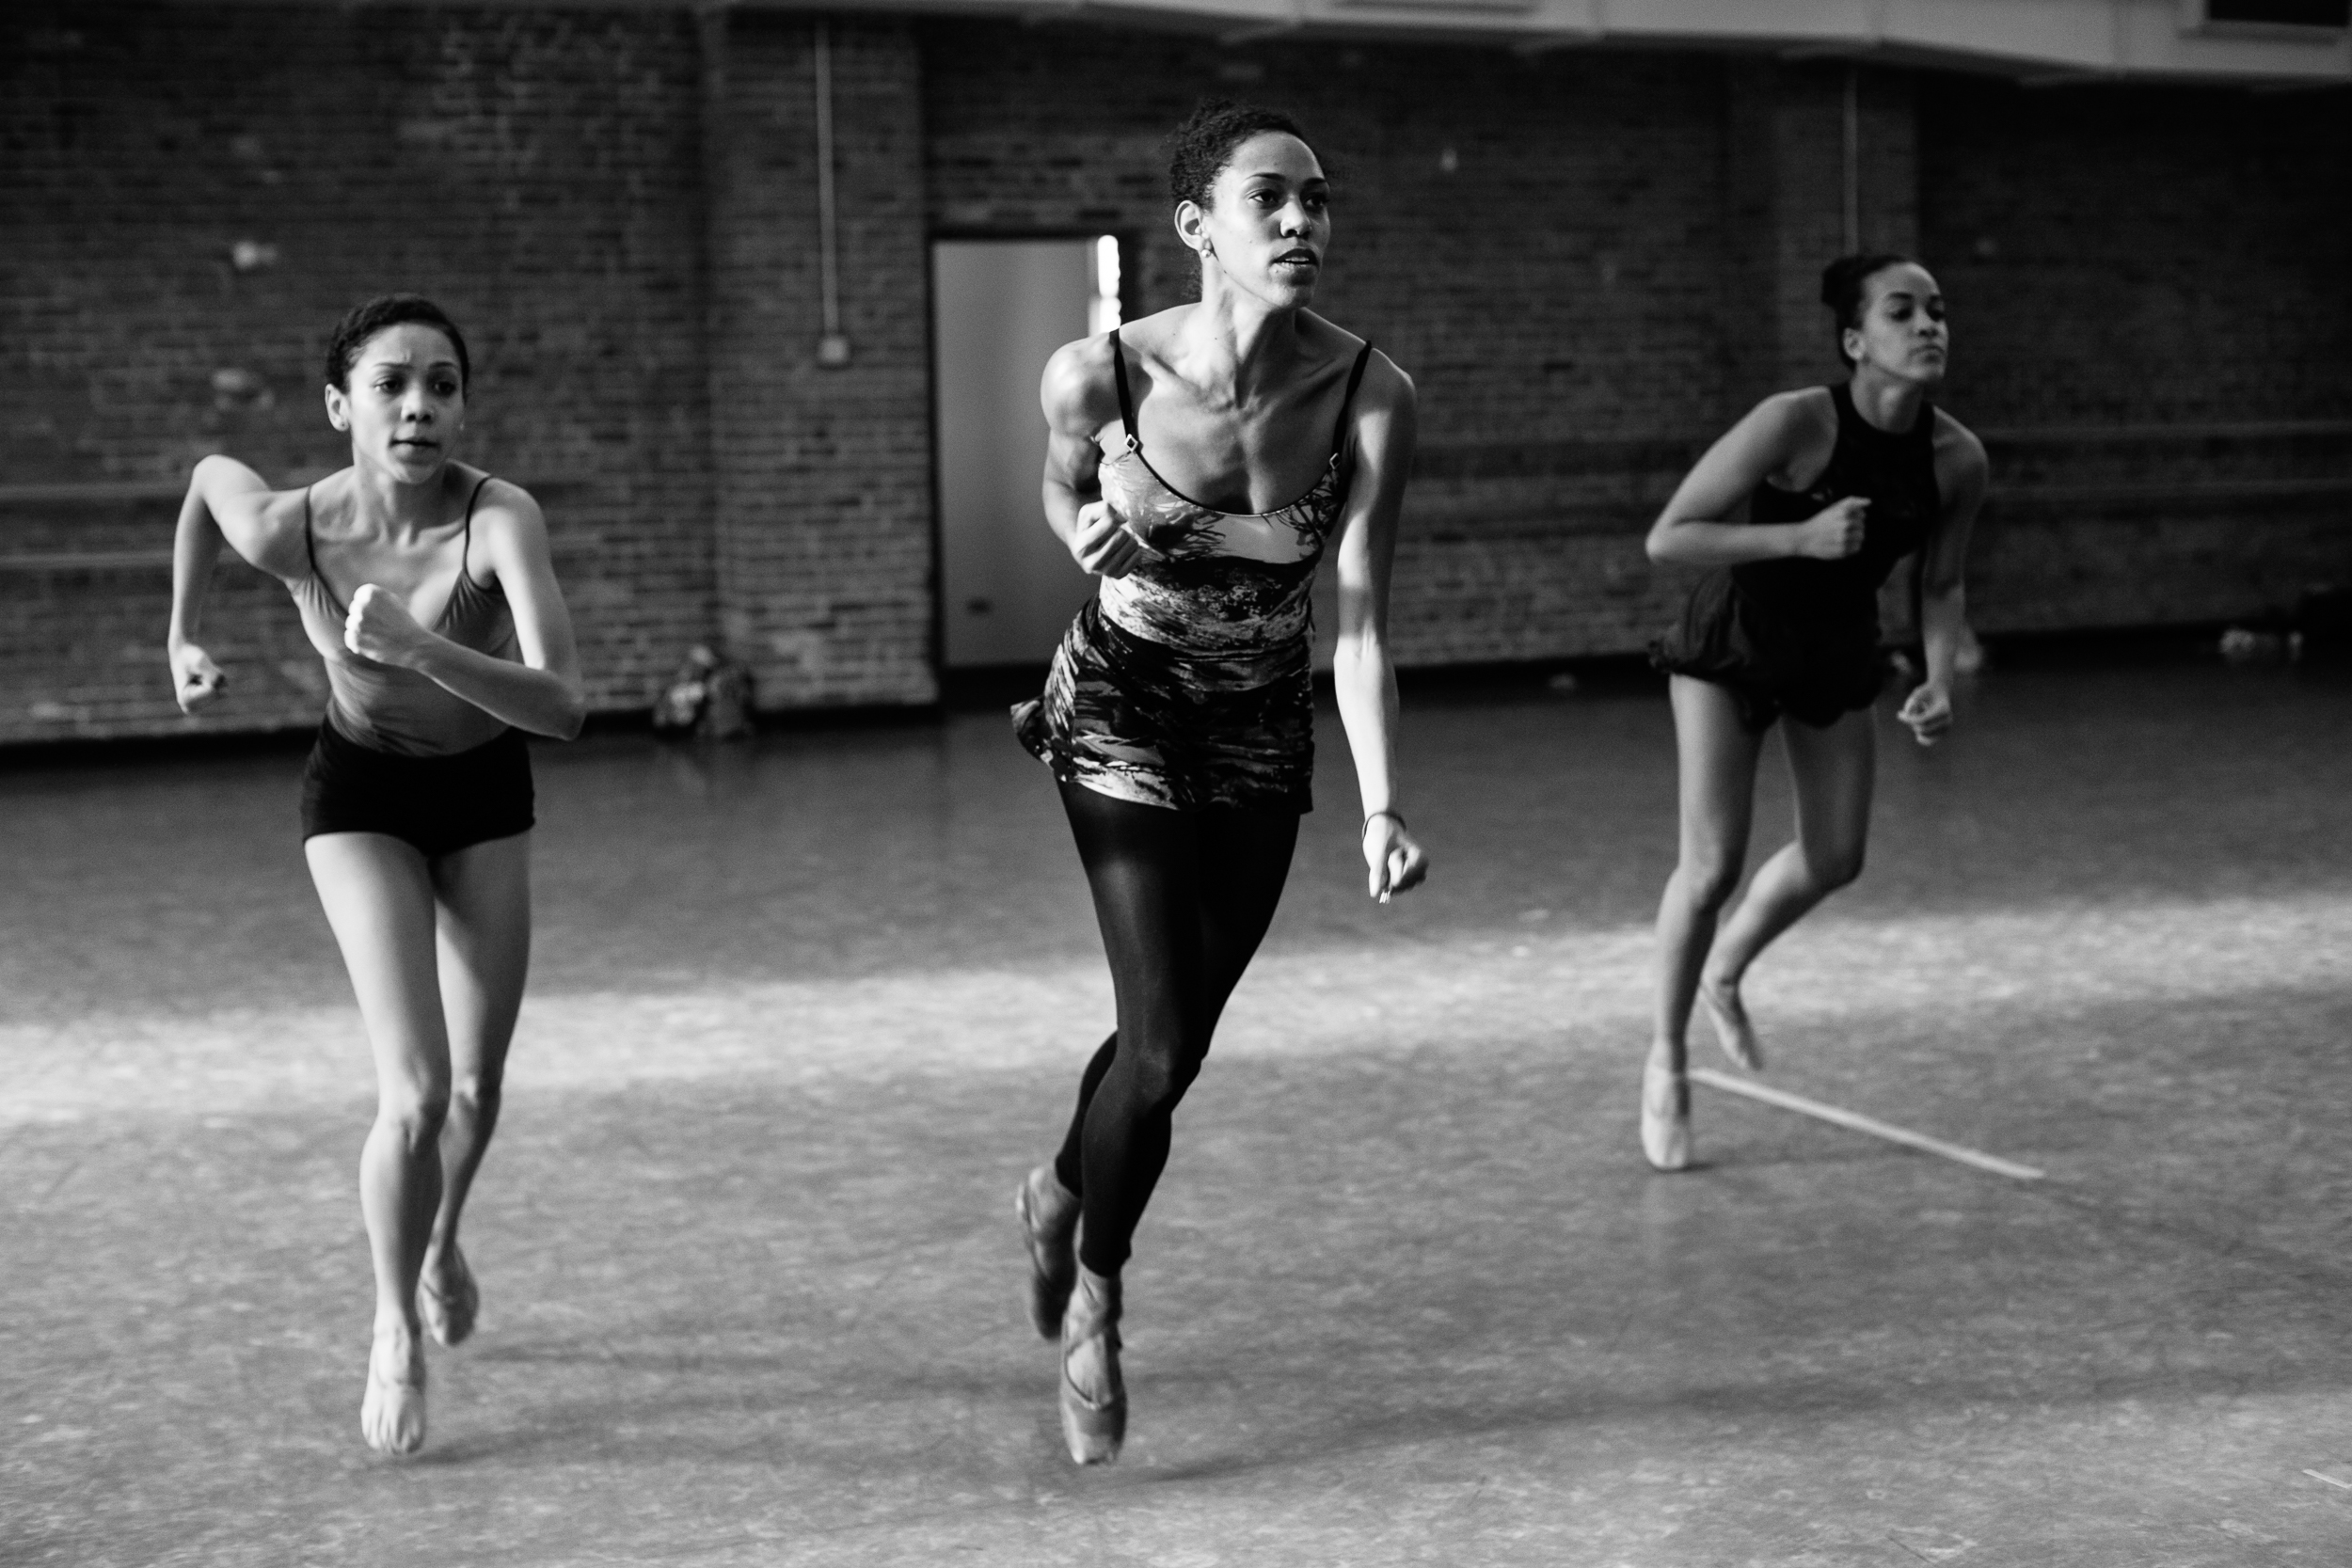  Dance Theatre of Harlem company members in rehearsal for Women Who Move Us, an initiative created to support new work by women. 